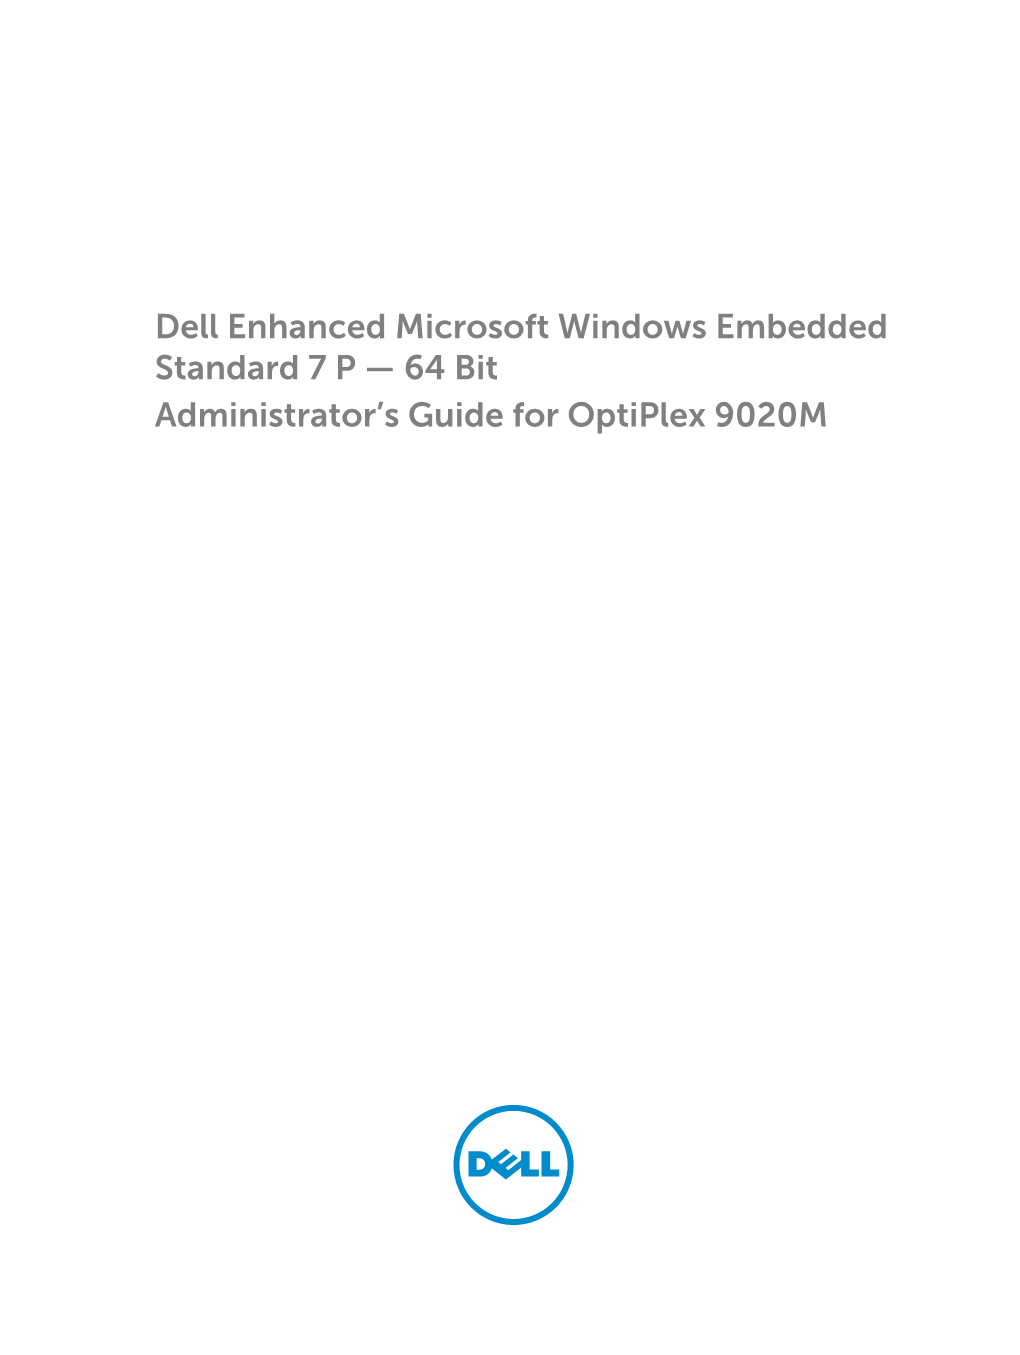 Dell Enhanced Microsoft Windows Embedded Standard 7 P — 64 Bit Administrator’S Guide for Optiplex 9020M Notes, Cautions, and Warnings